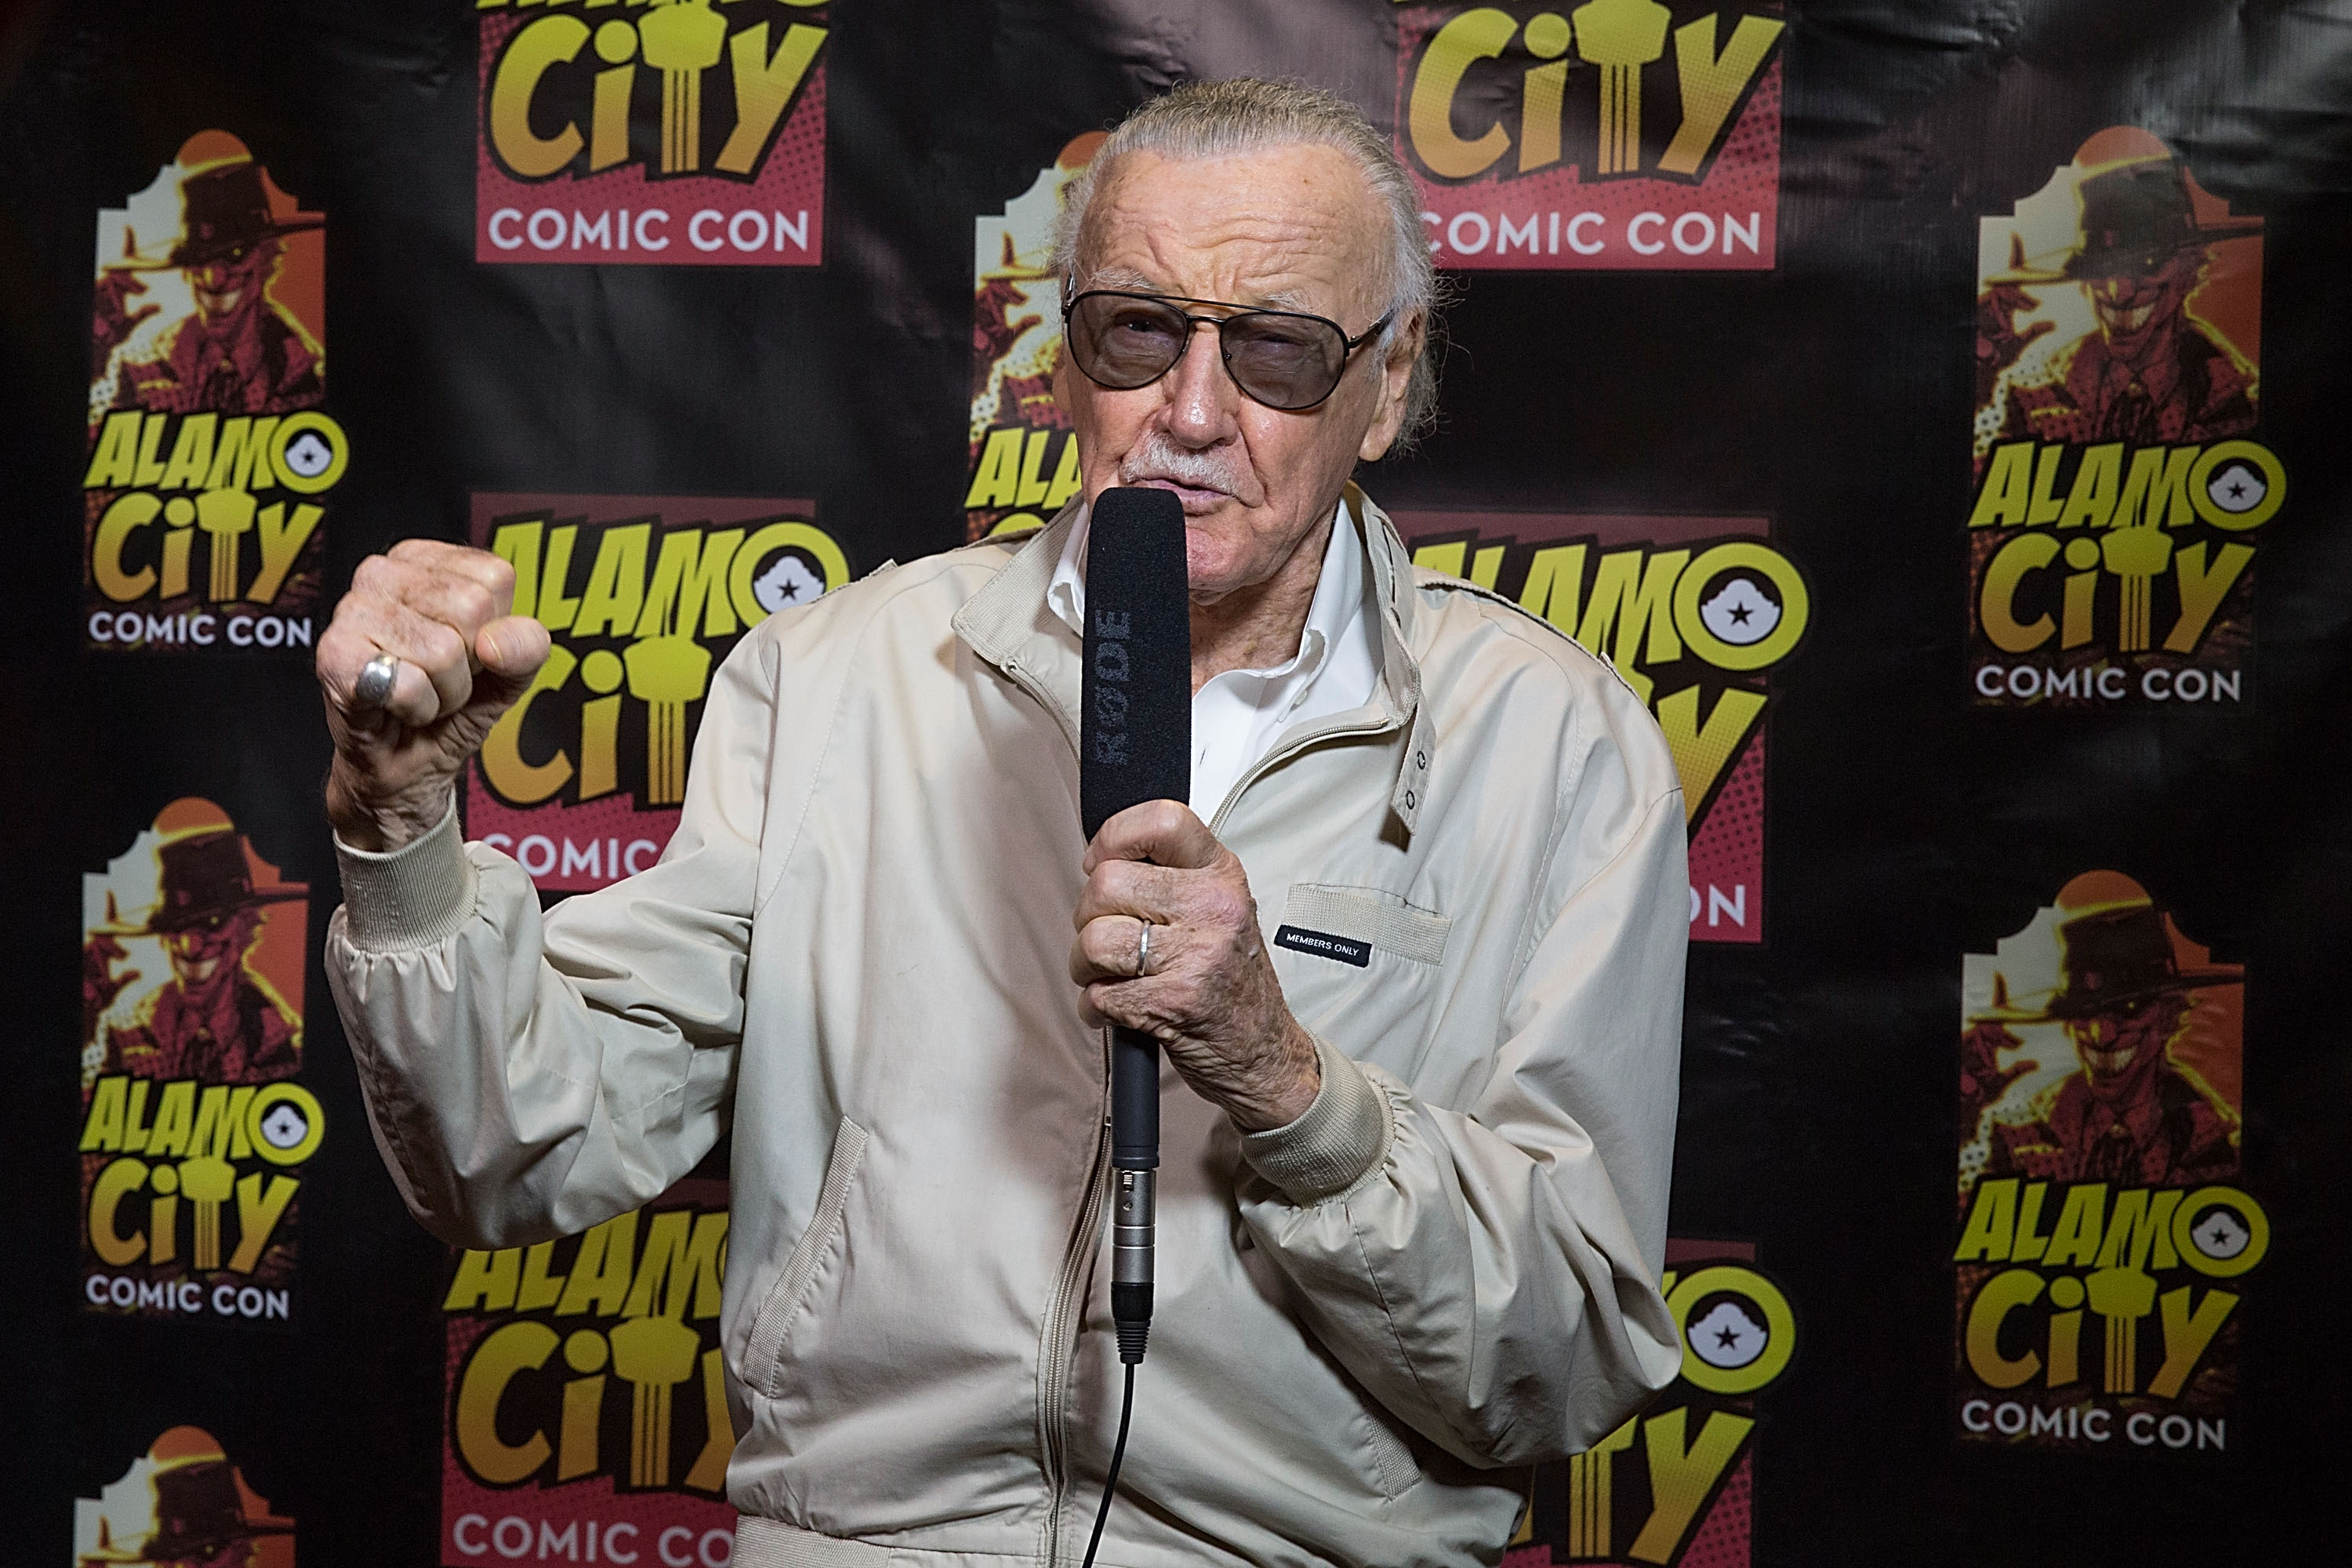 Comic book writer Stan Lee attends day one of the Alamo City Comic Con at the Henry B. Gonzalez Convention Center on September 26, 2014 in San Antonio, Texas. (Rick Kern—WireImage)